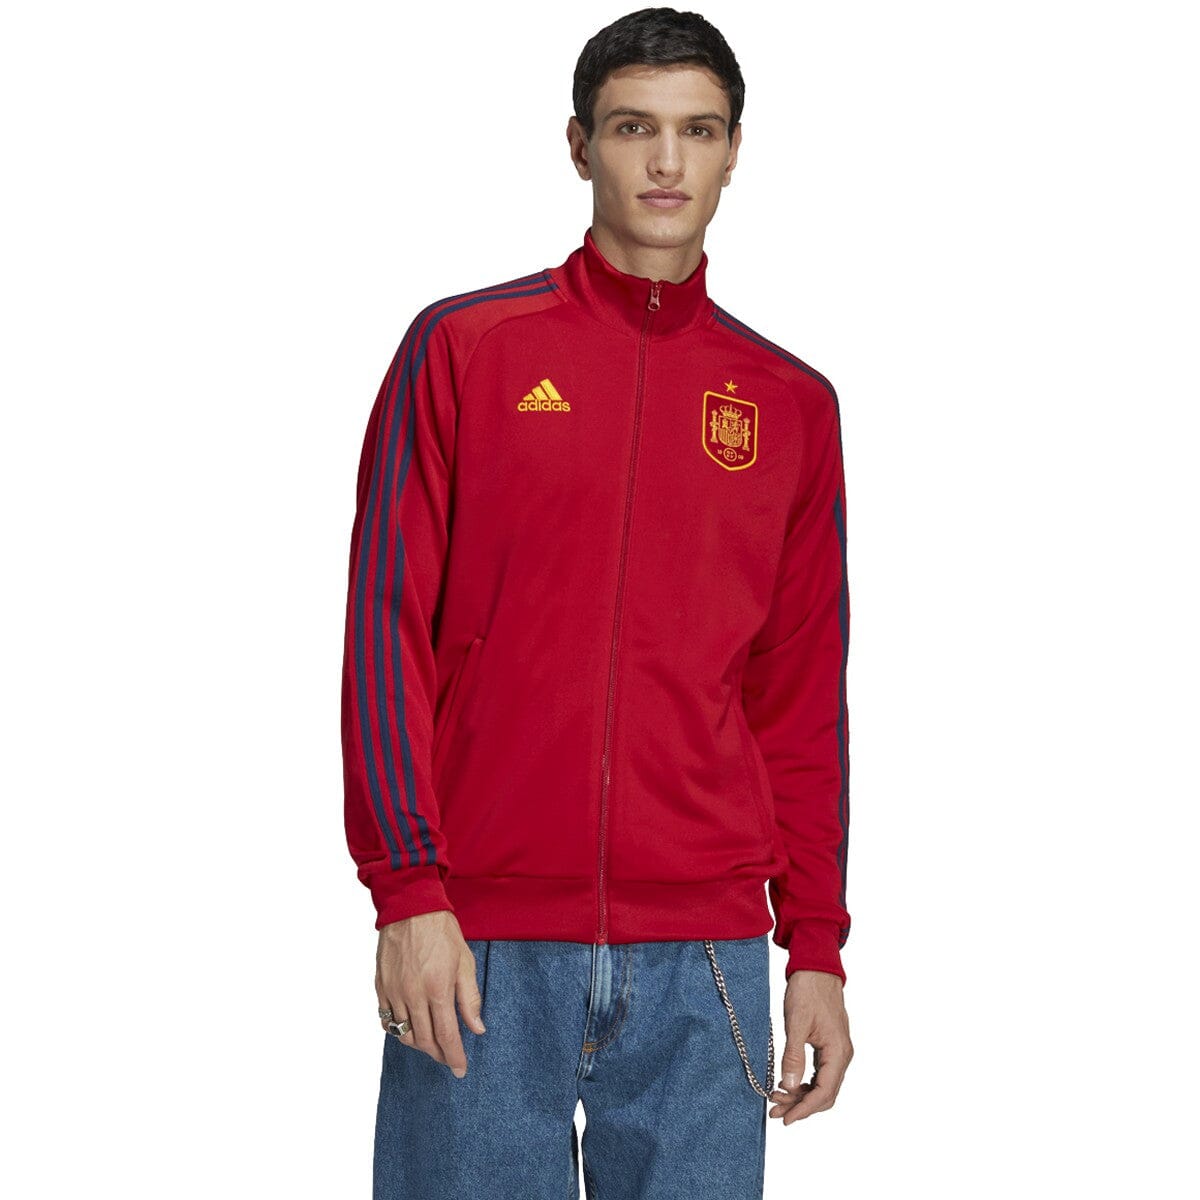 adidas Men's Spain 3 Stripe Track Top | HE8900 Licensed-Apparel Adidas Adult Small Red 